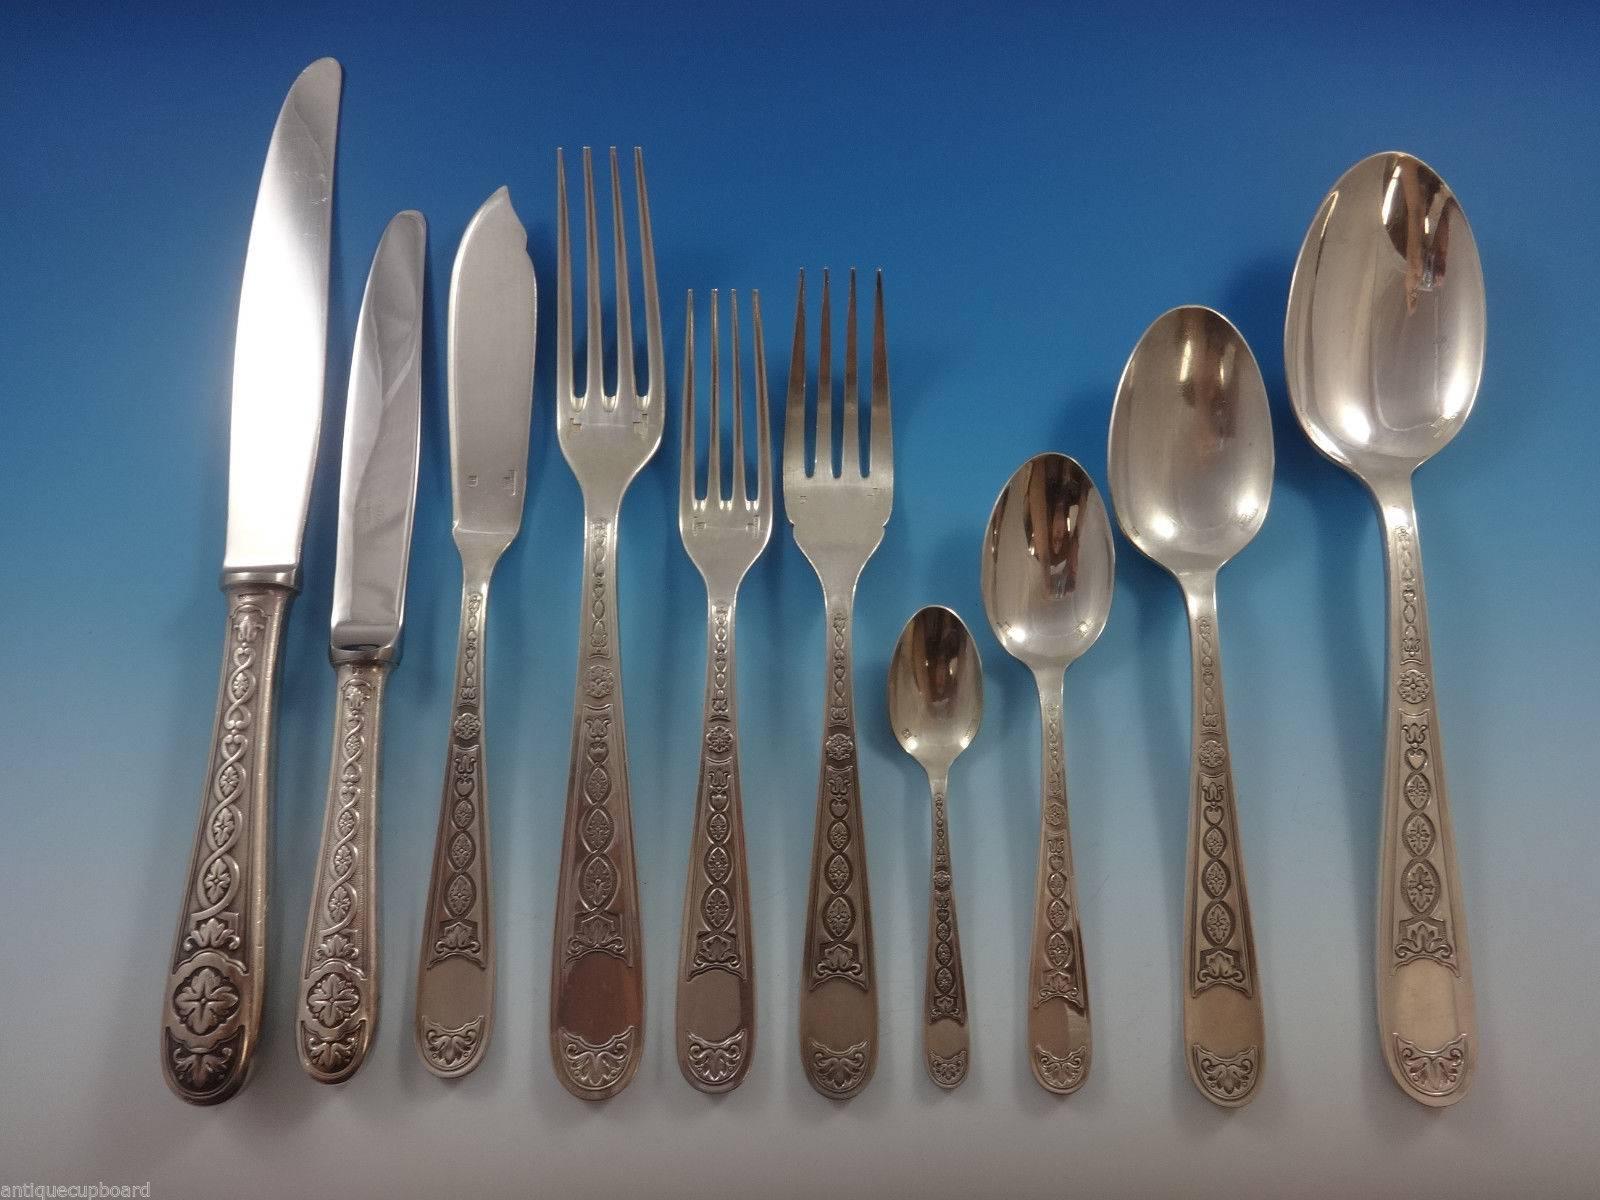 With a dedication to perfection and quality, Christofle flatware creations unite craftsmanship and modern technique in homage to the silversmith's art. The result is flatware to be handed down through generations. 

Beautiful Villeroy